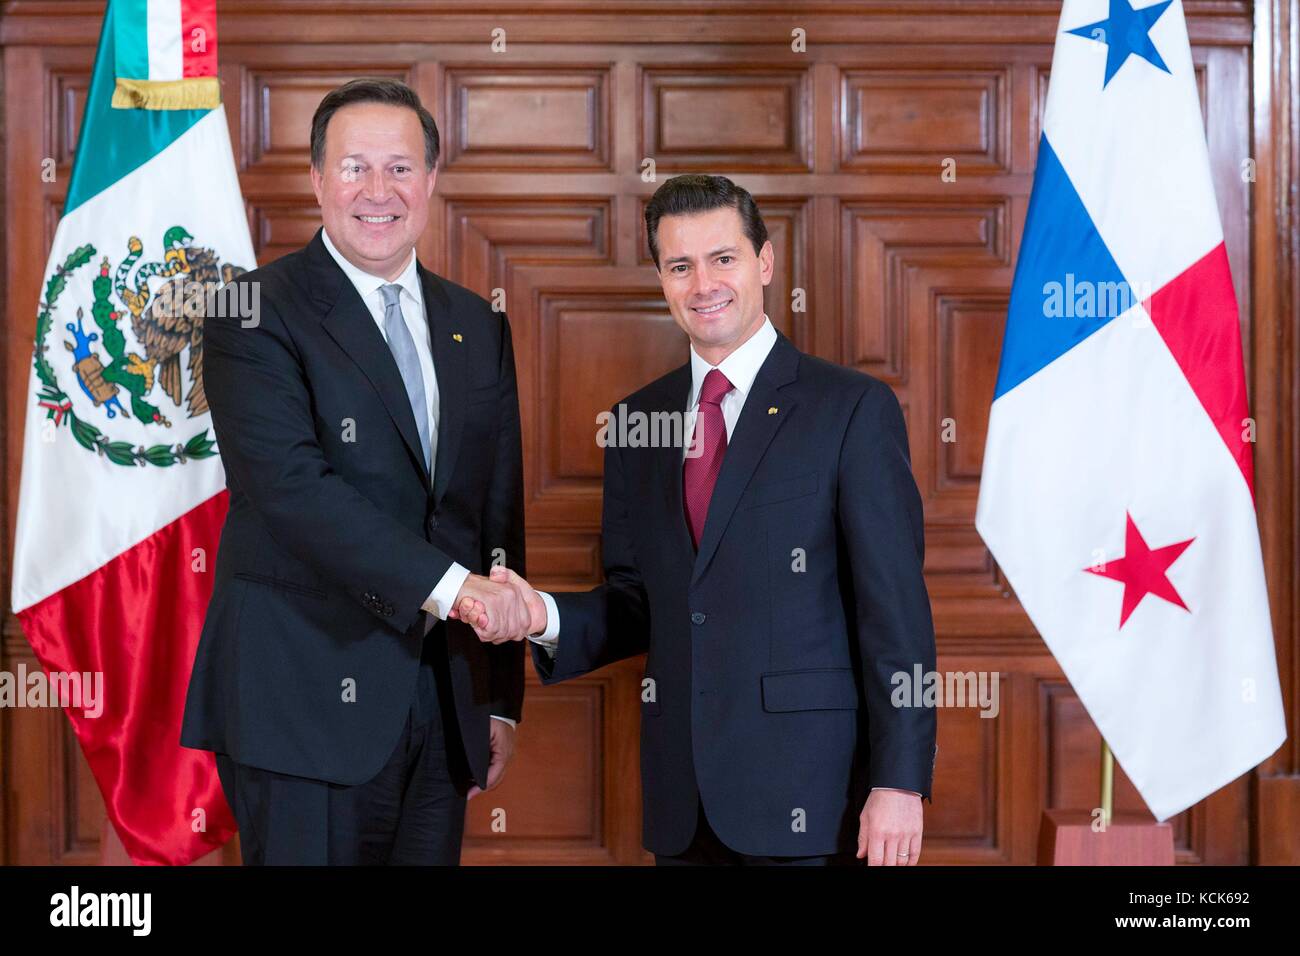 Panamanian President Juan Carlos Varela Rodriguez (left) meets with Mexican President Enrique Pena Nieto during a visit to the National Palace November 14, 2016 in Mexico City, Mexico.  (photo by Mexican Presidency Photo  via Planetpix) Stock Photo